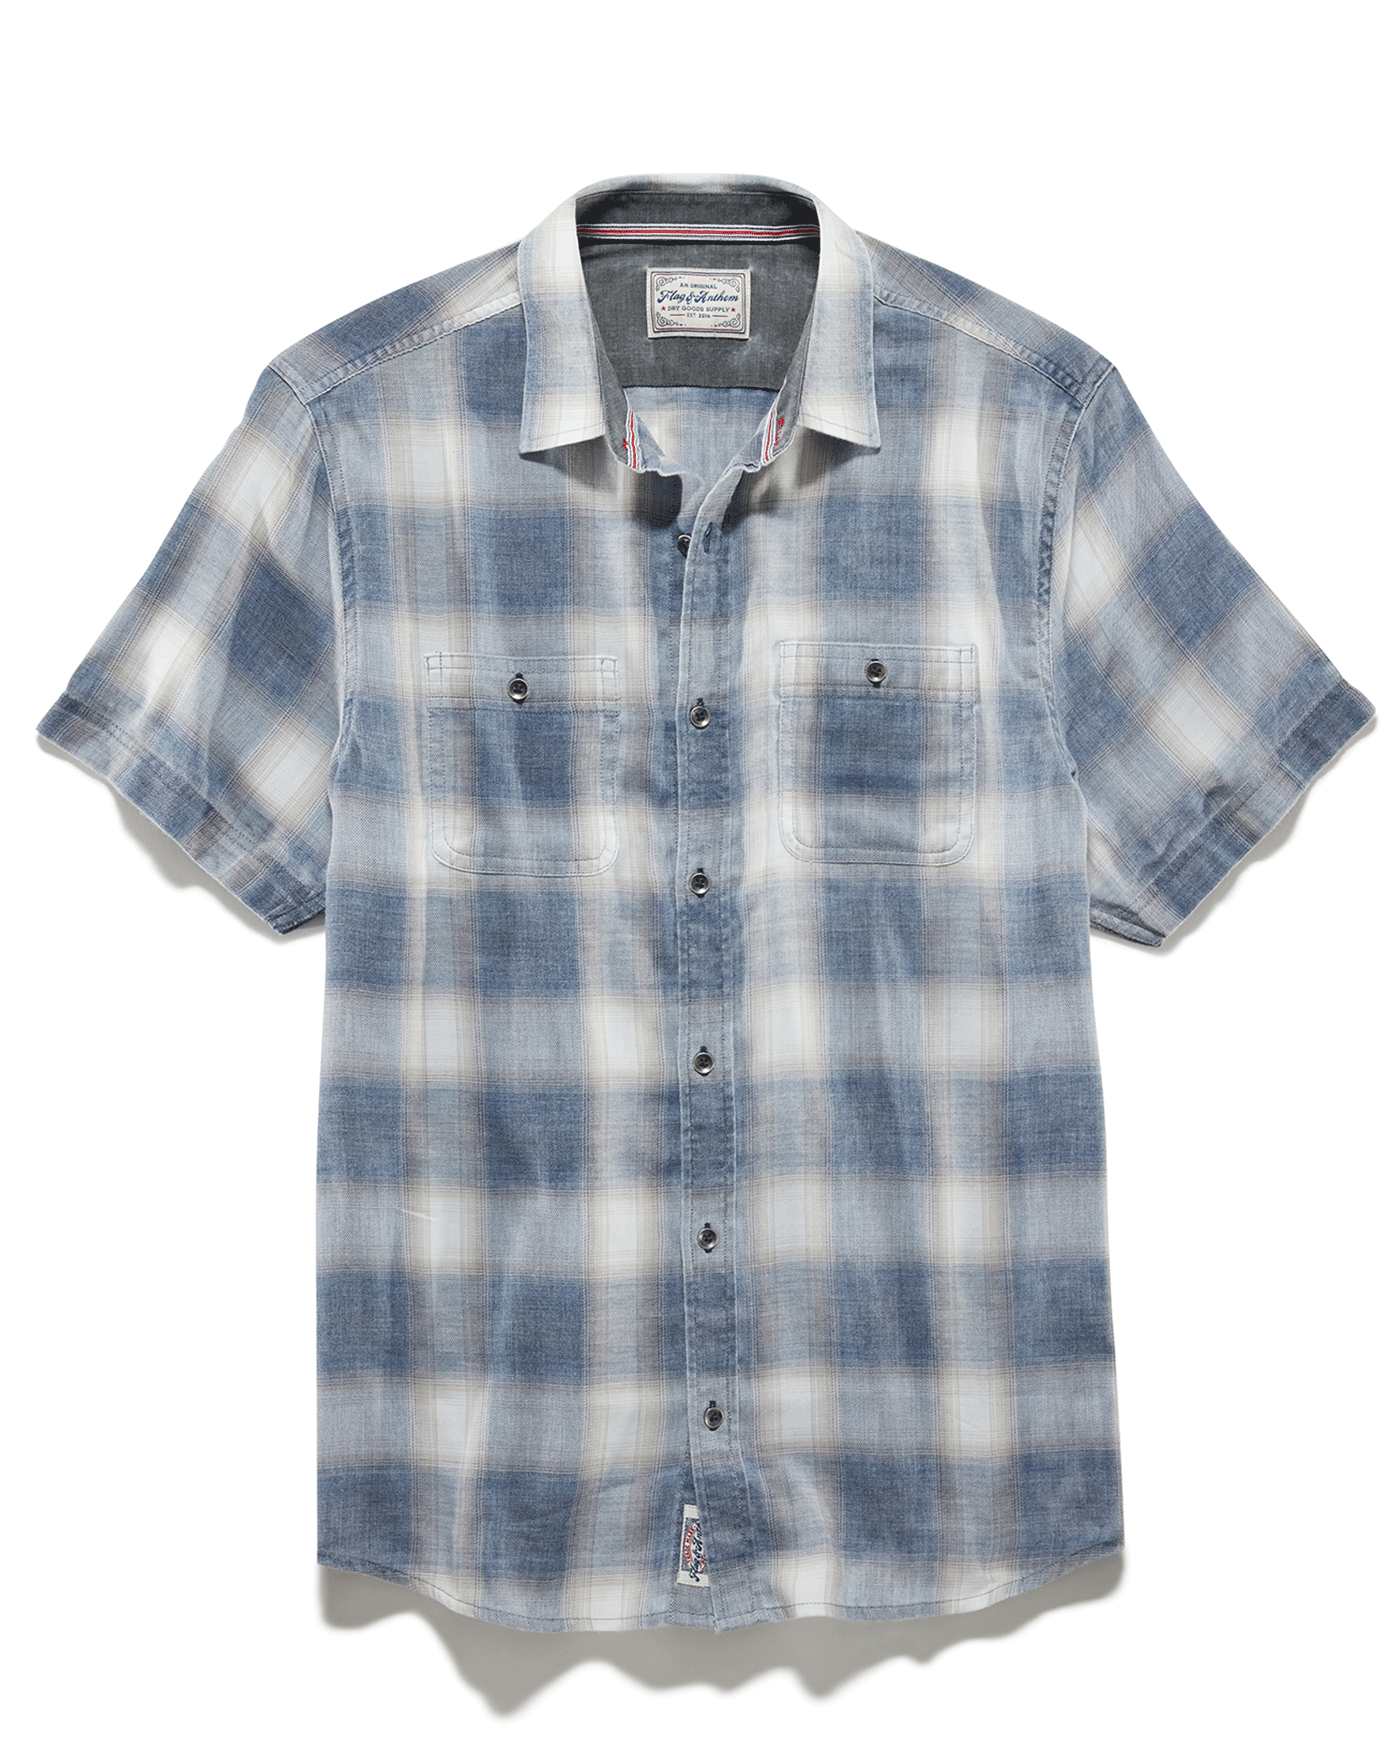 LUTHER VINTAGE SOFT STRETCH SHIRT